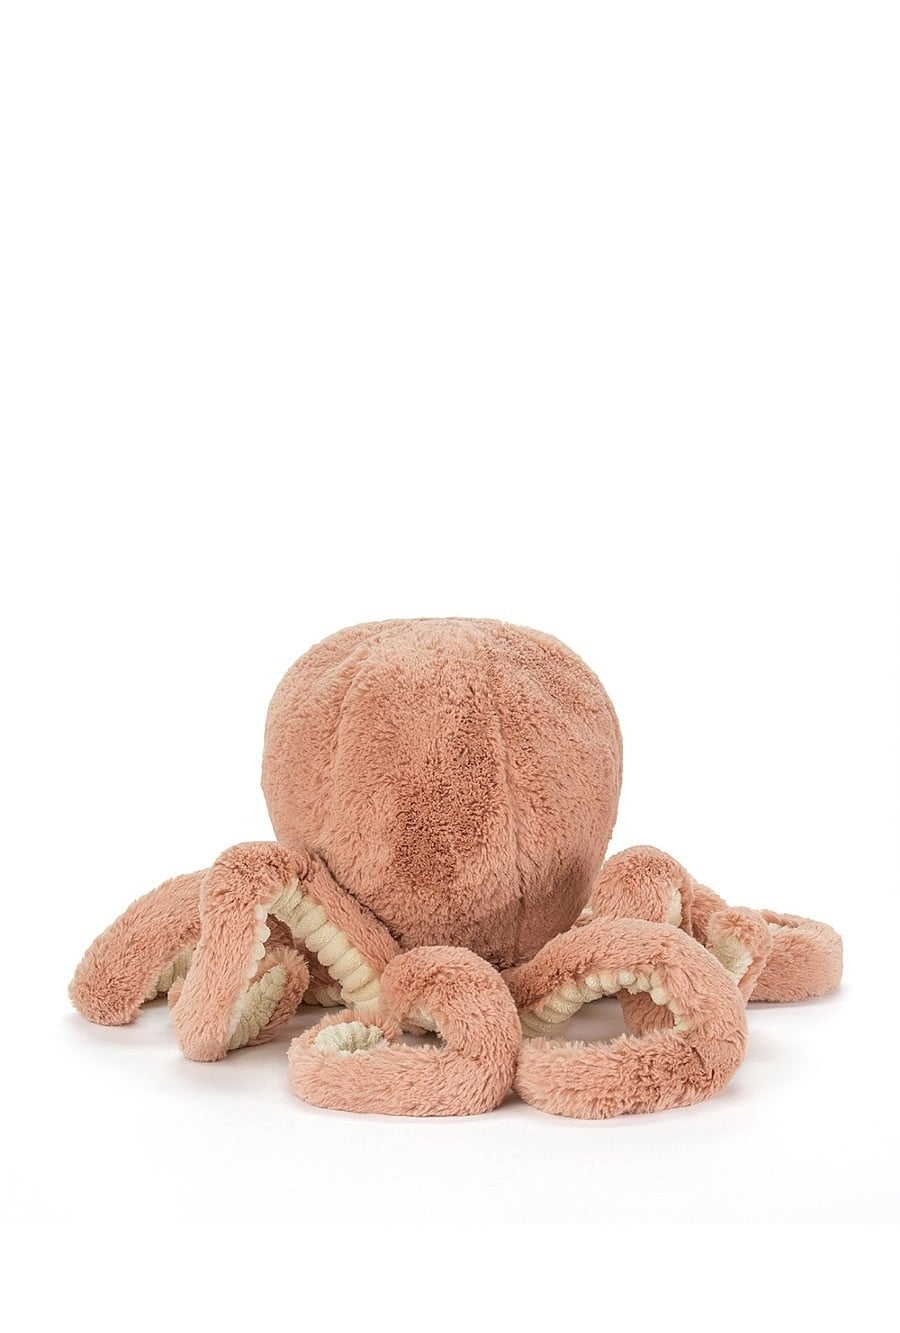 Odell Octopus, large